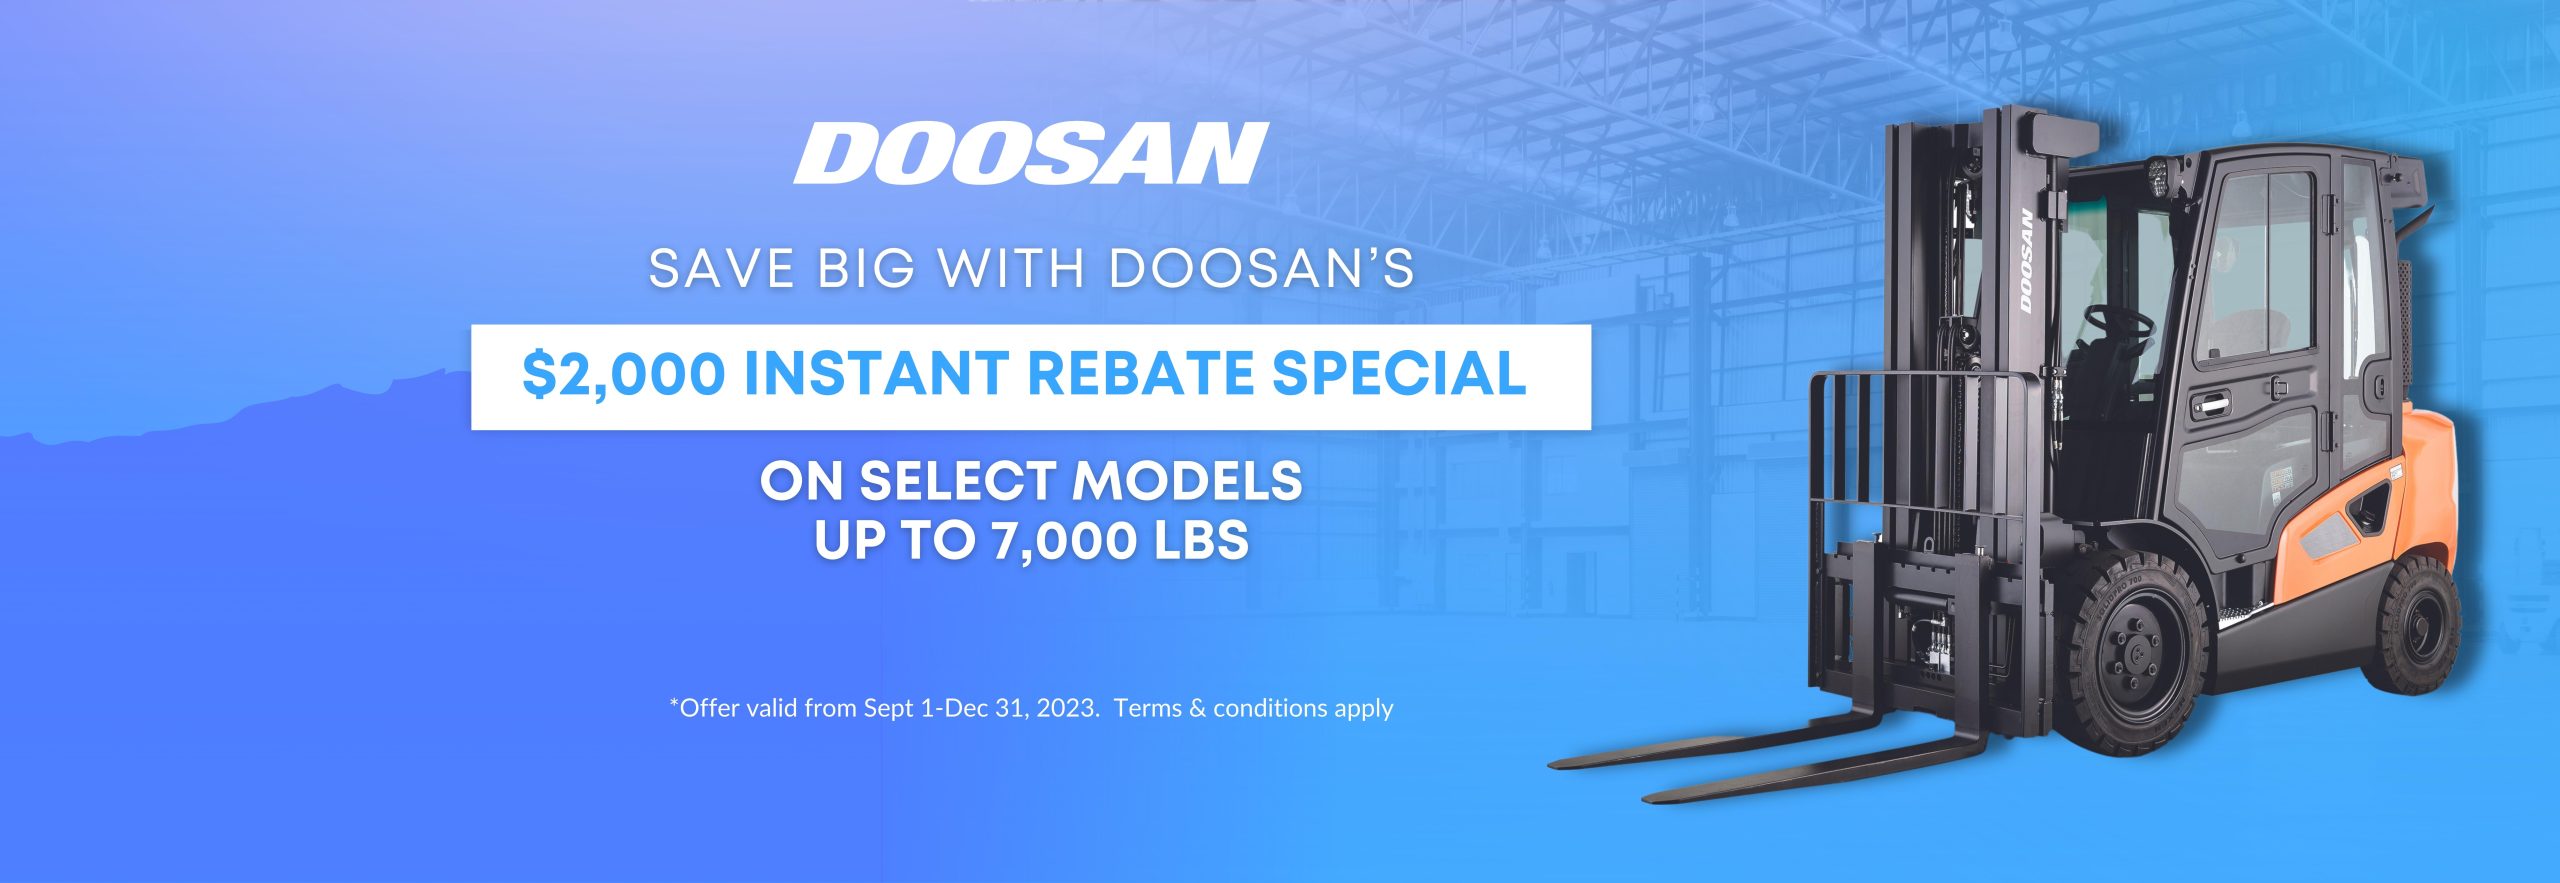 Doosan's $2,000 Instant Rebate Special on Select Models up to 7,000 lbs.